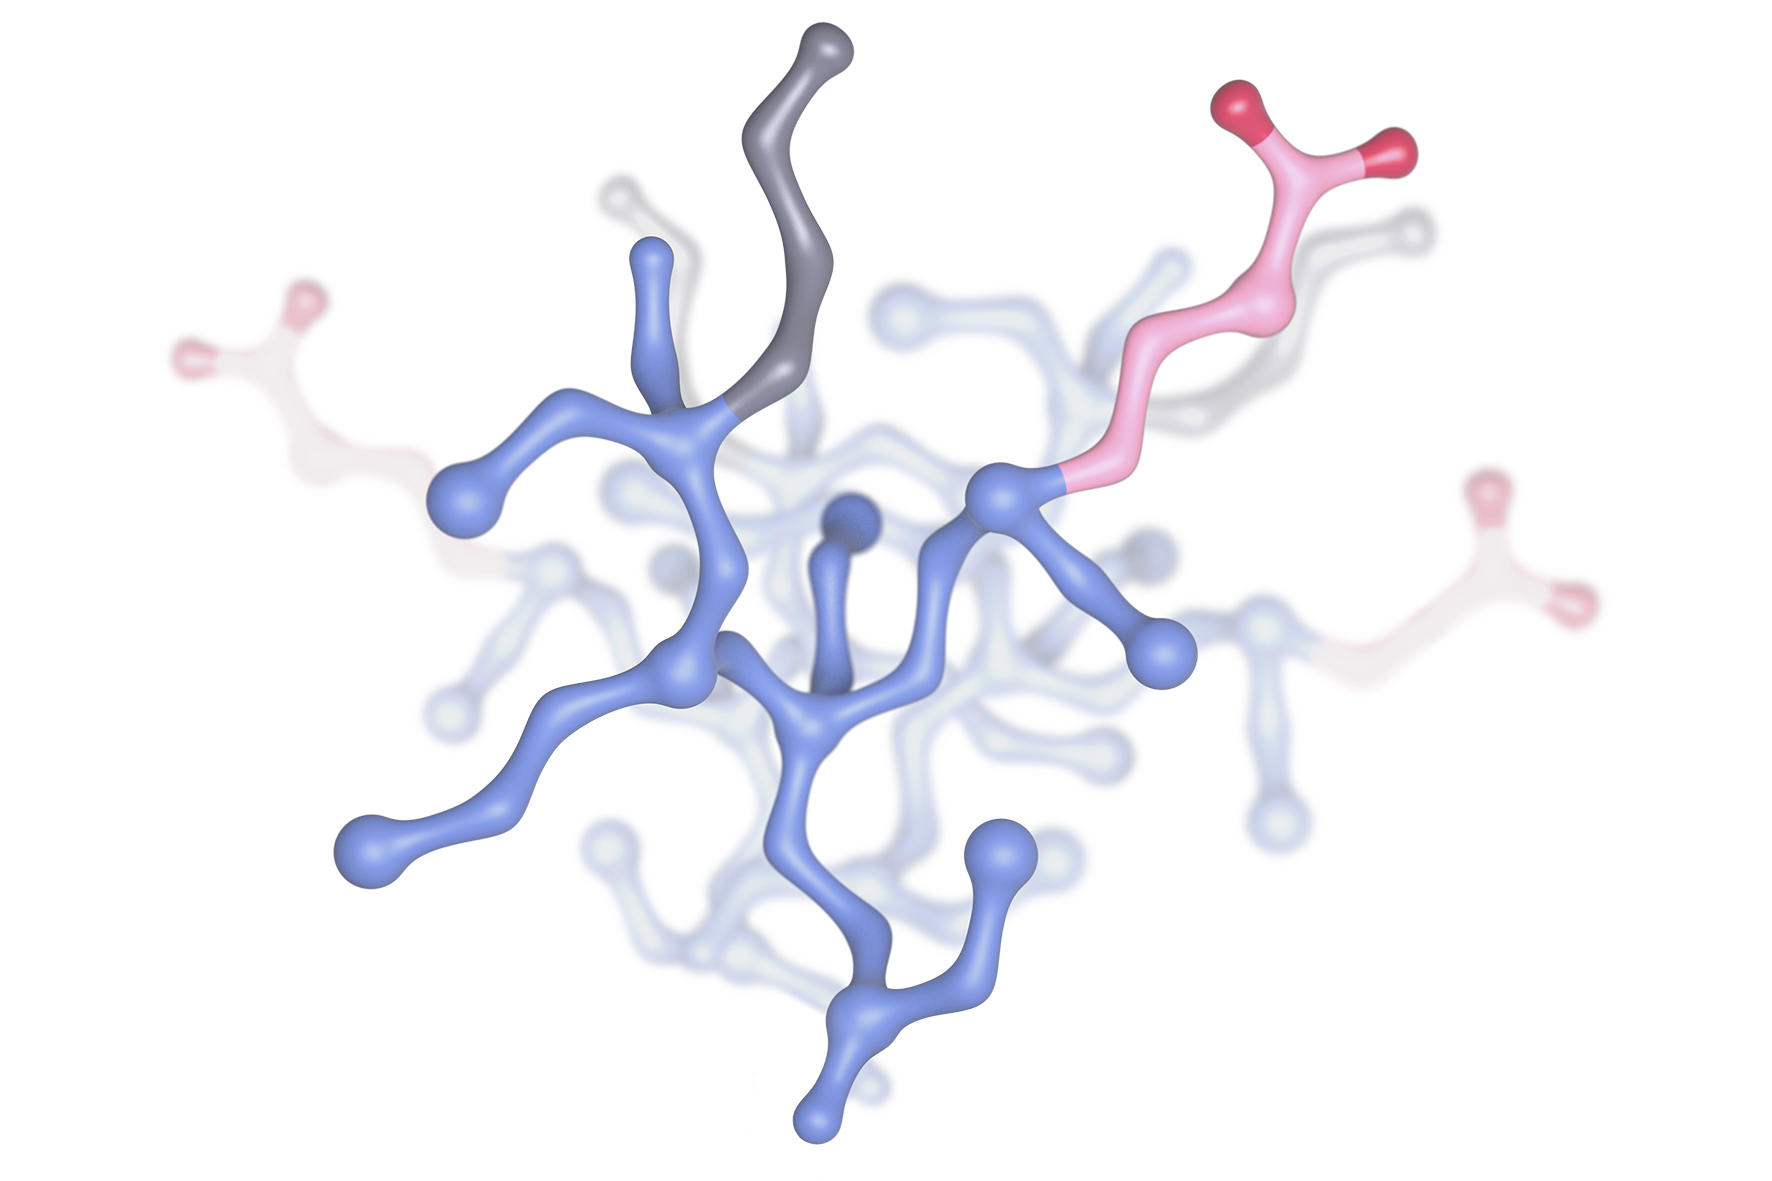 Central structural element of a viromer (blue: binding site for the nucleic acids that are to be transported | gray: alkyl chain for membrane mobility | red: carboxyl residues ensure the solubility of the structure and act as a pH sensor)